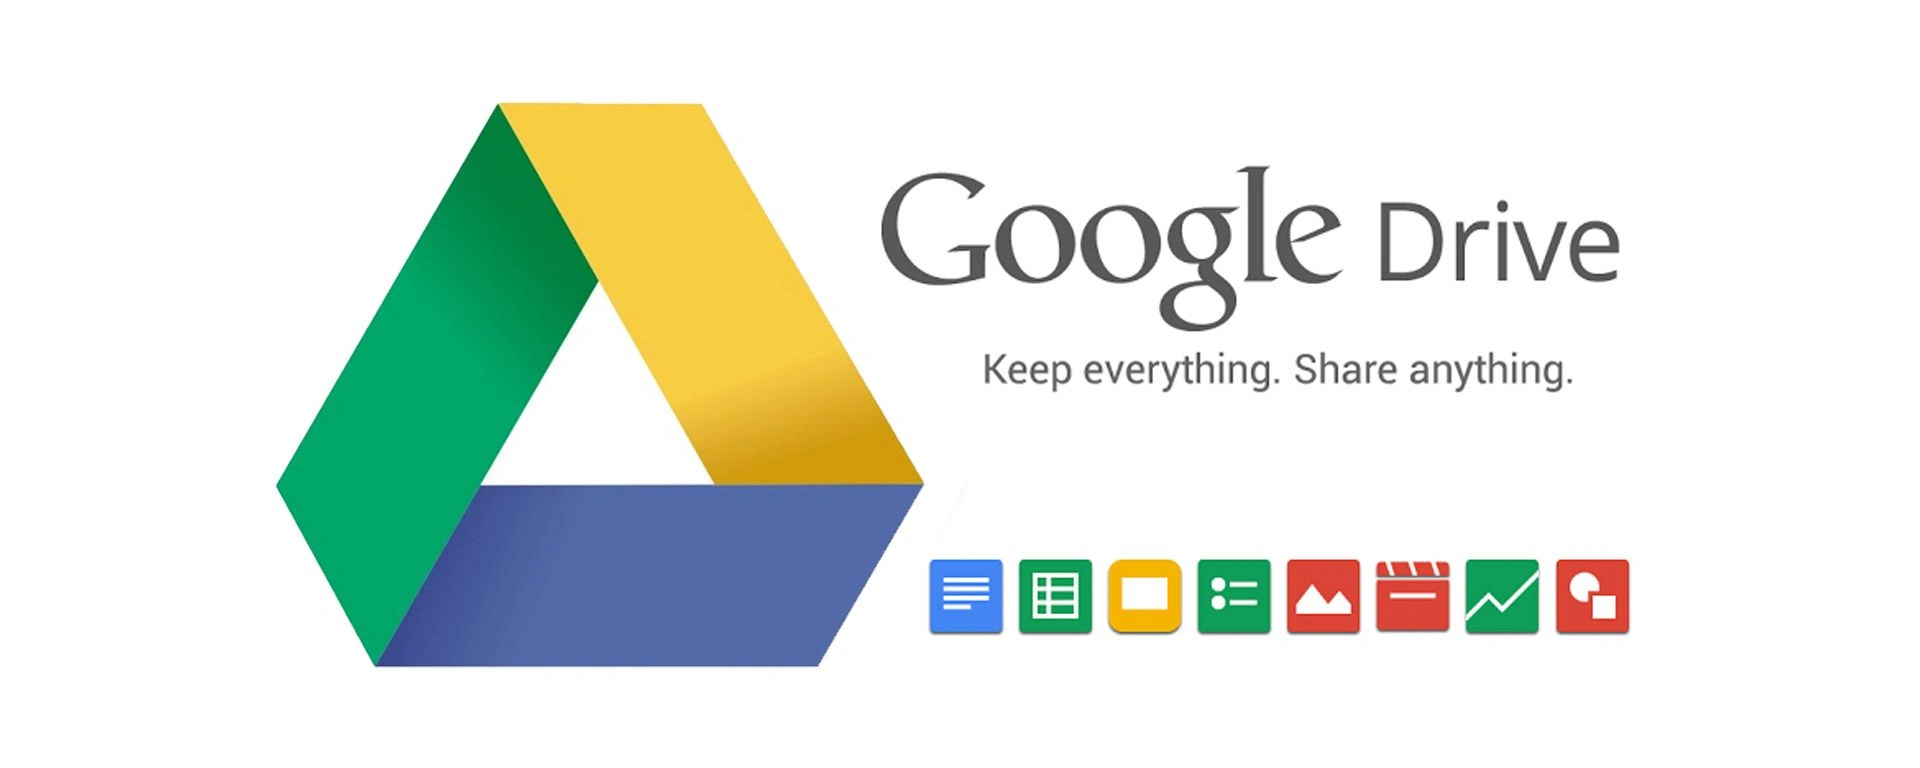 Top 10 Google Drive Management Tips You Wish You Knew Sooner image